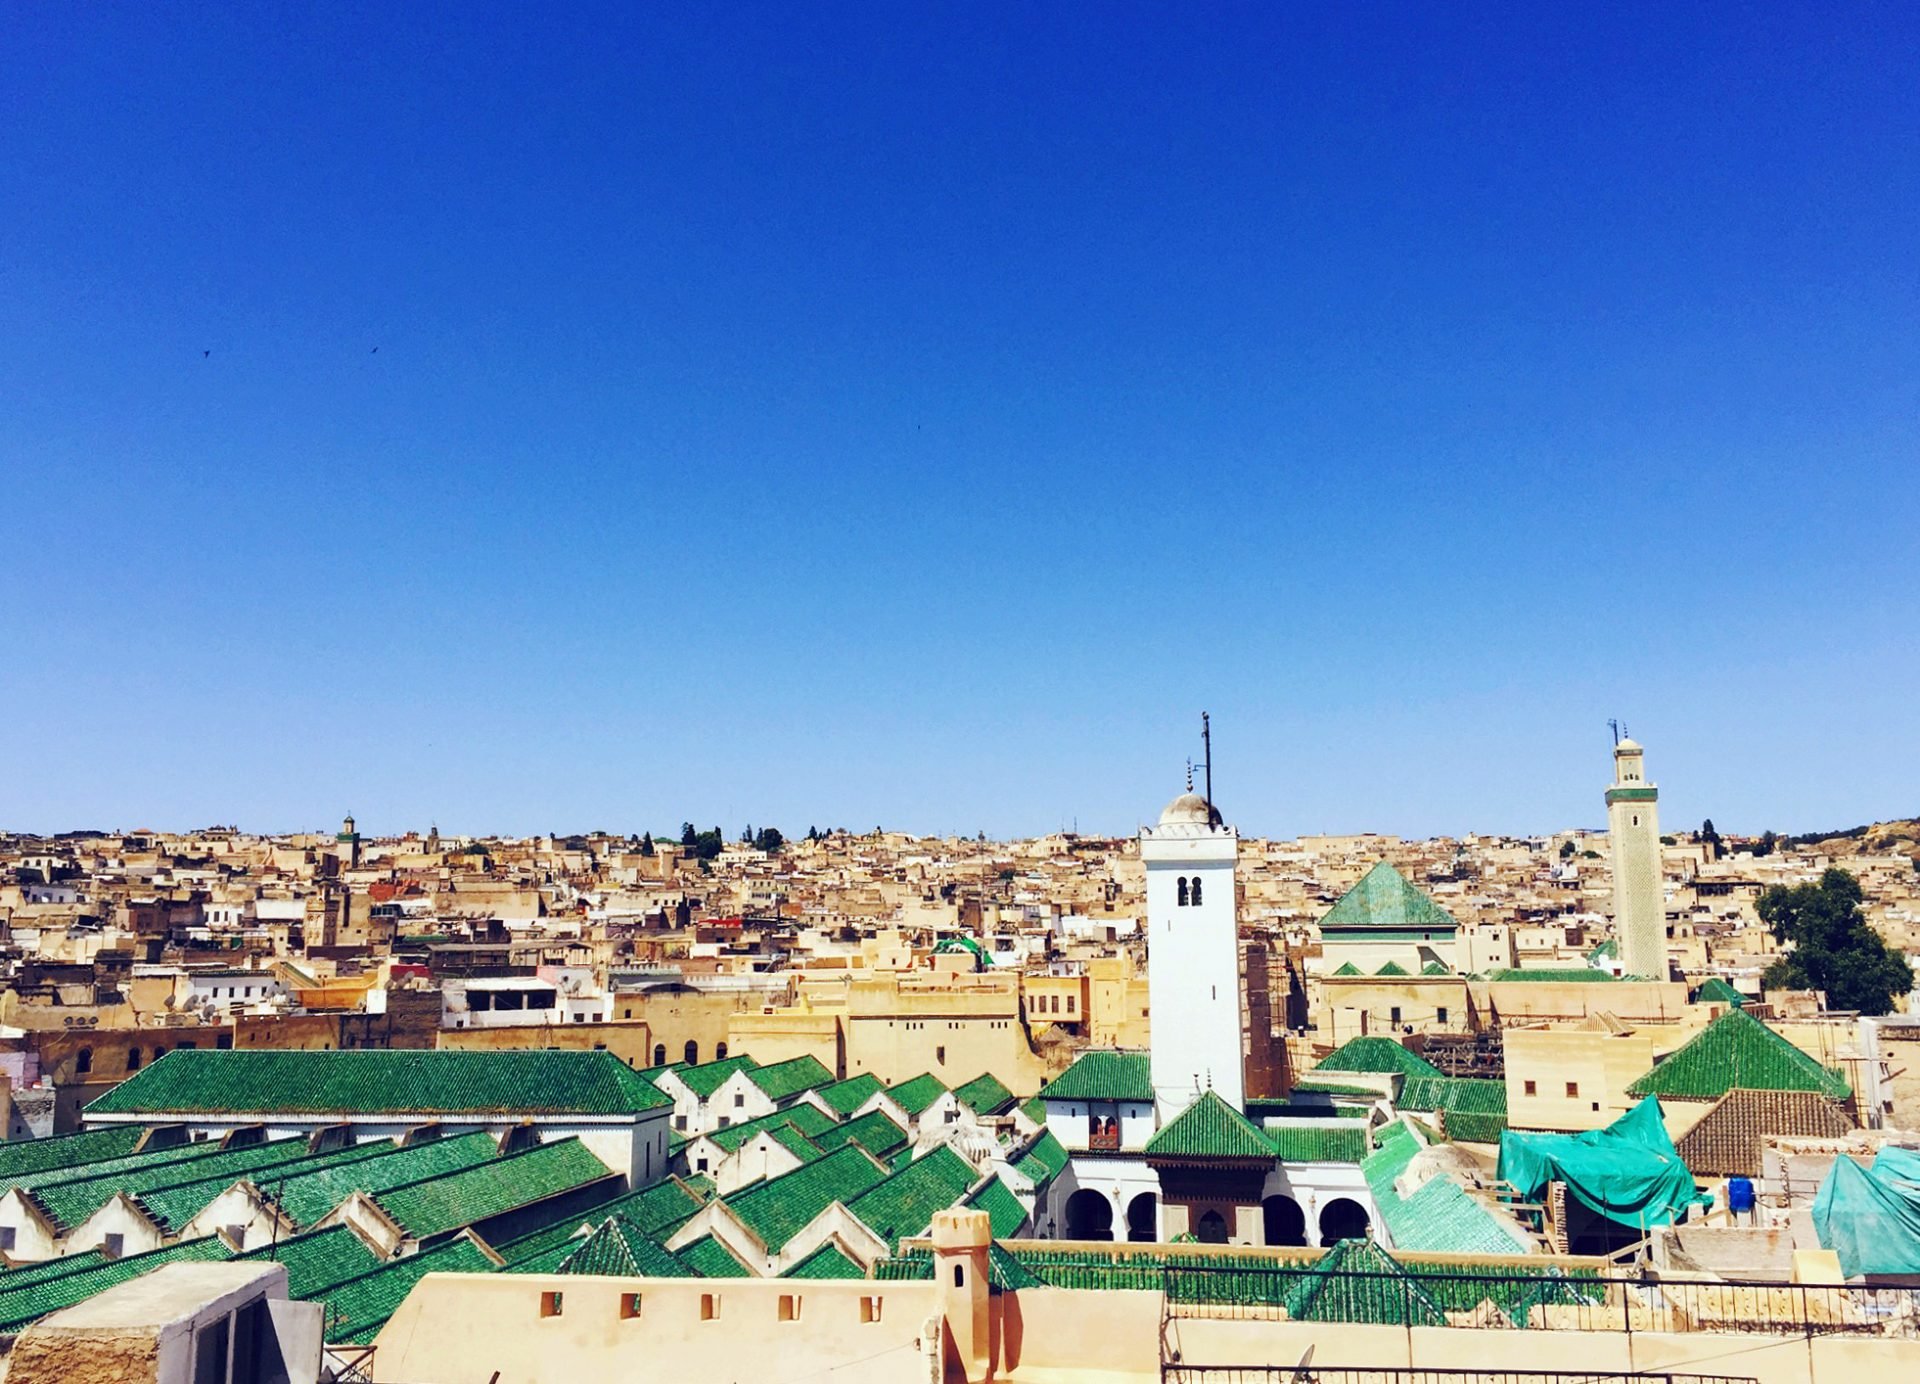 A view of the historic city of Fez in Morocco, with the white and beige buildings and green rooftops of the Al-Qarawiyyin Mosque and school complex in the center. The mosque has two tall minarets, one with a clock tower and the other with a green dome. The sky is clear and blue.